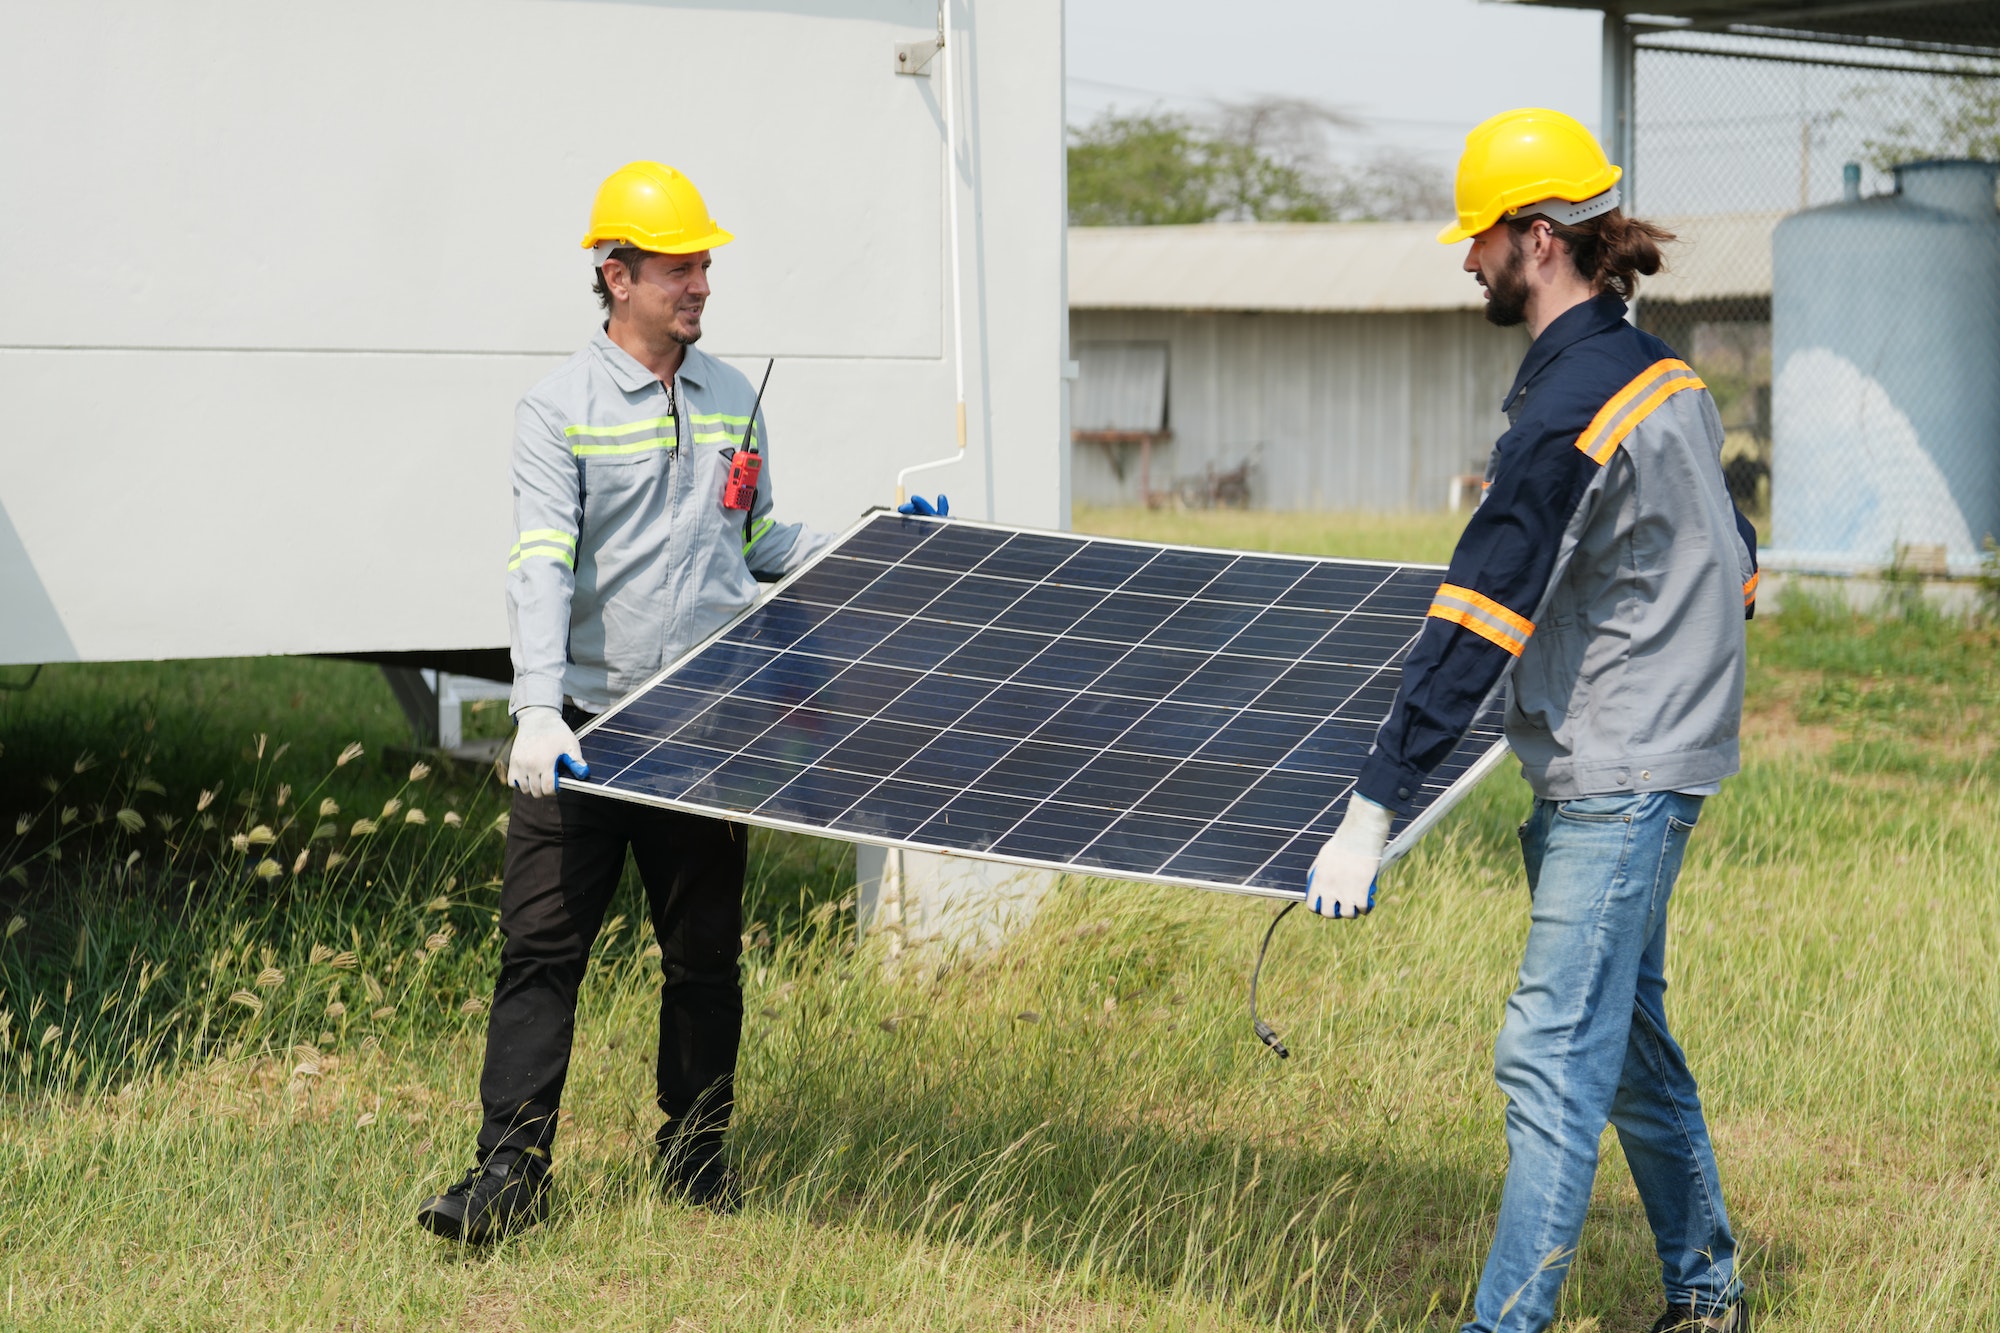 Solor voltaic panels, indusrty engineer working at construction of solar farm. energy industry.